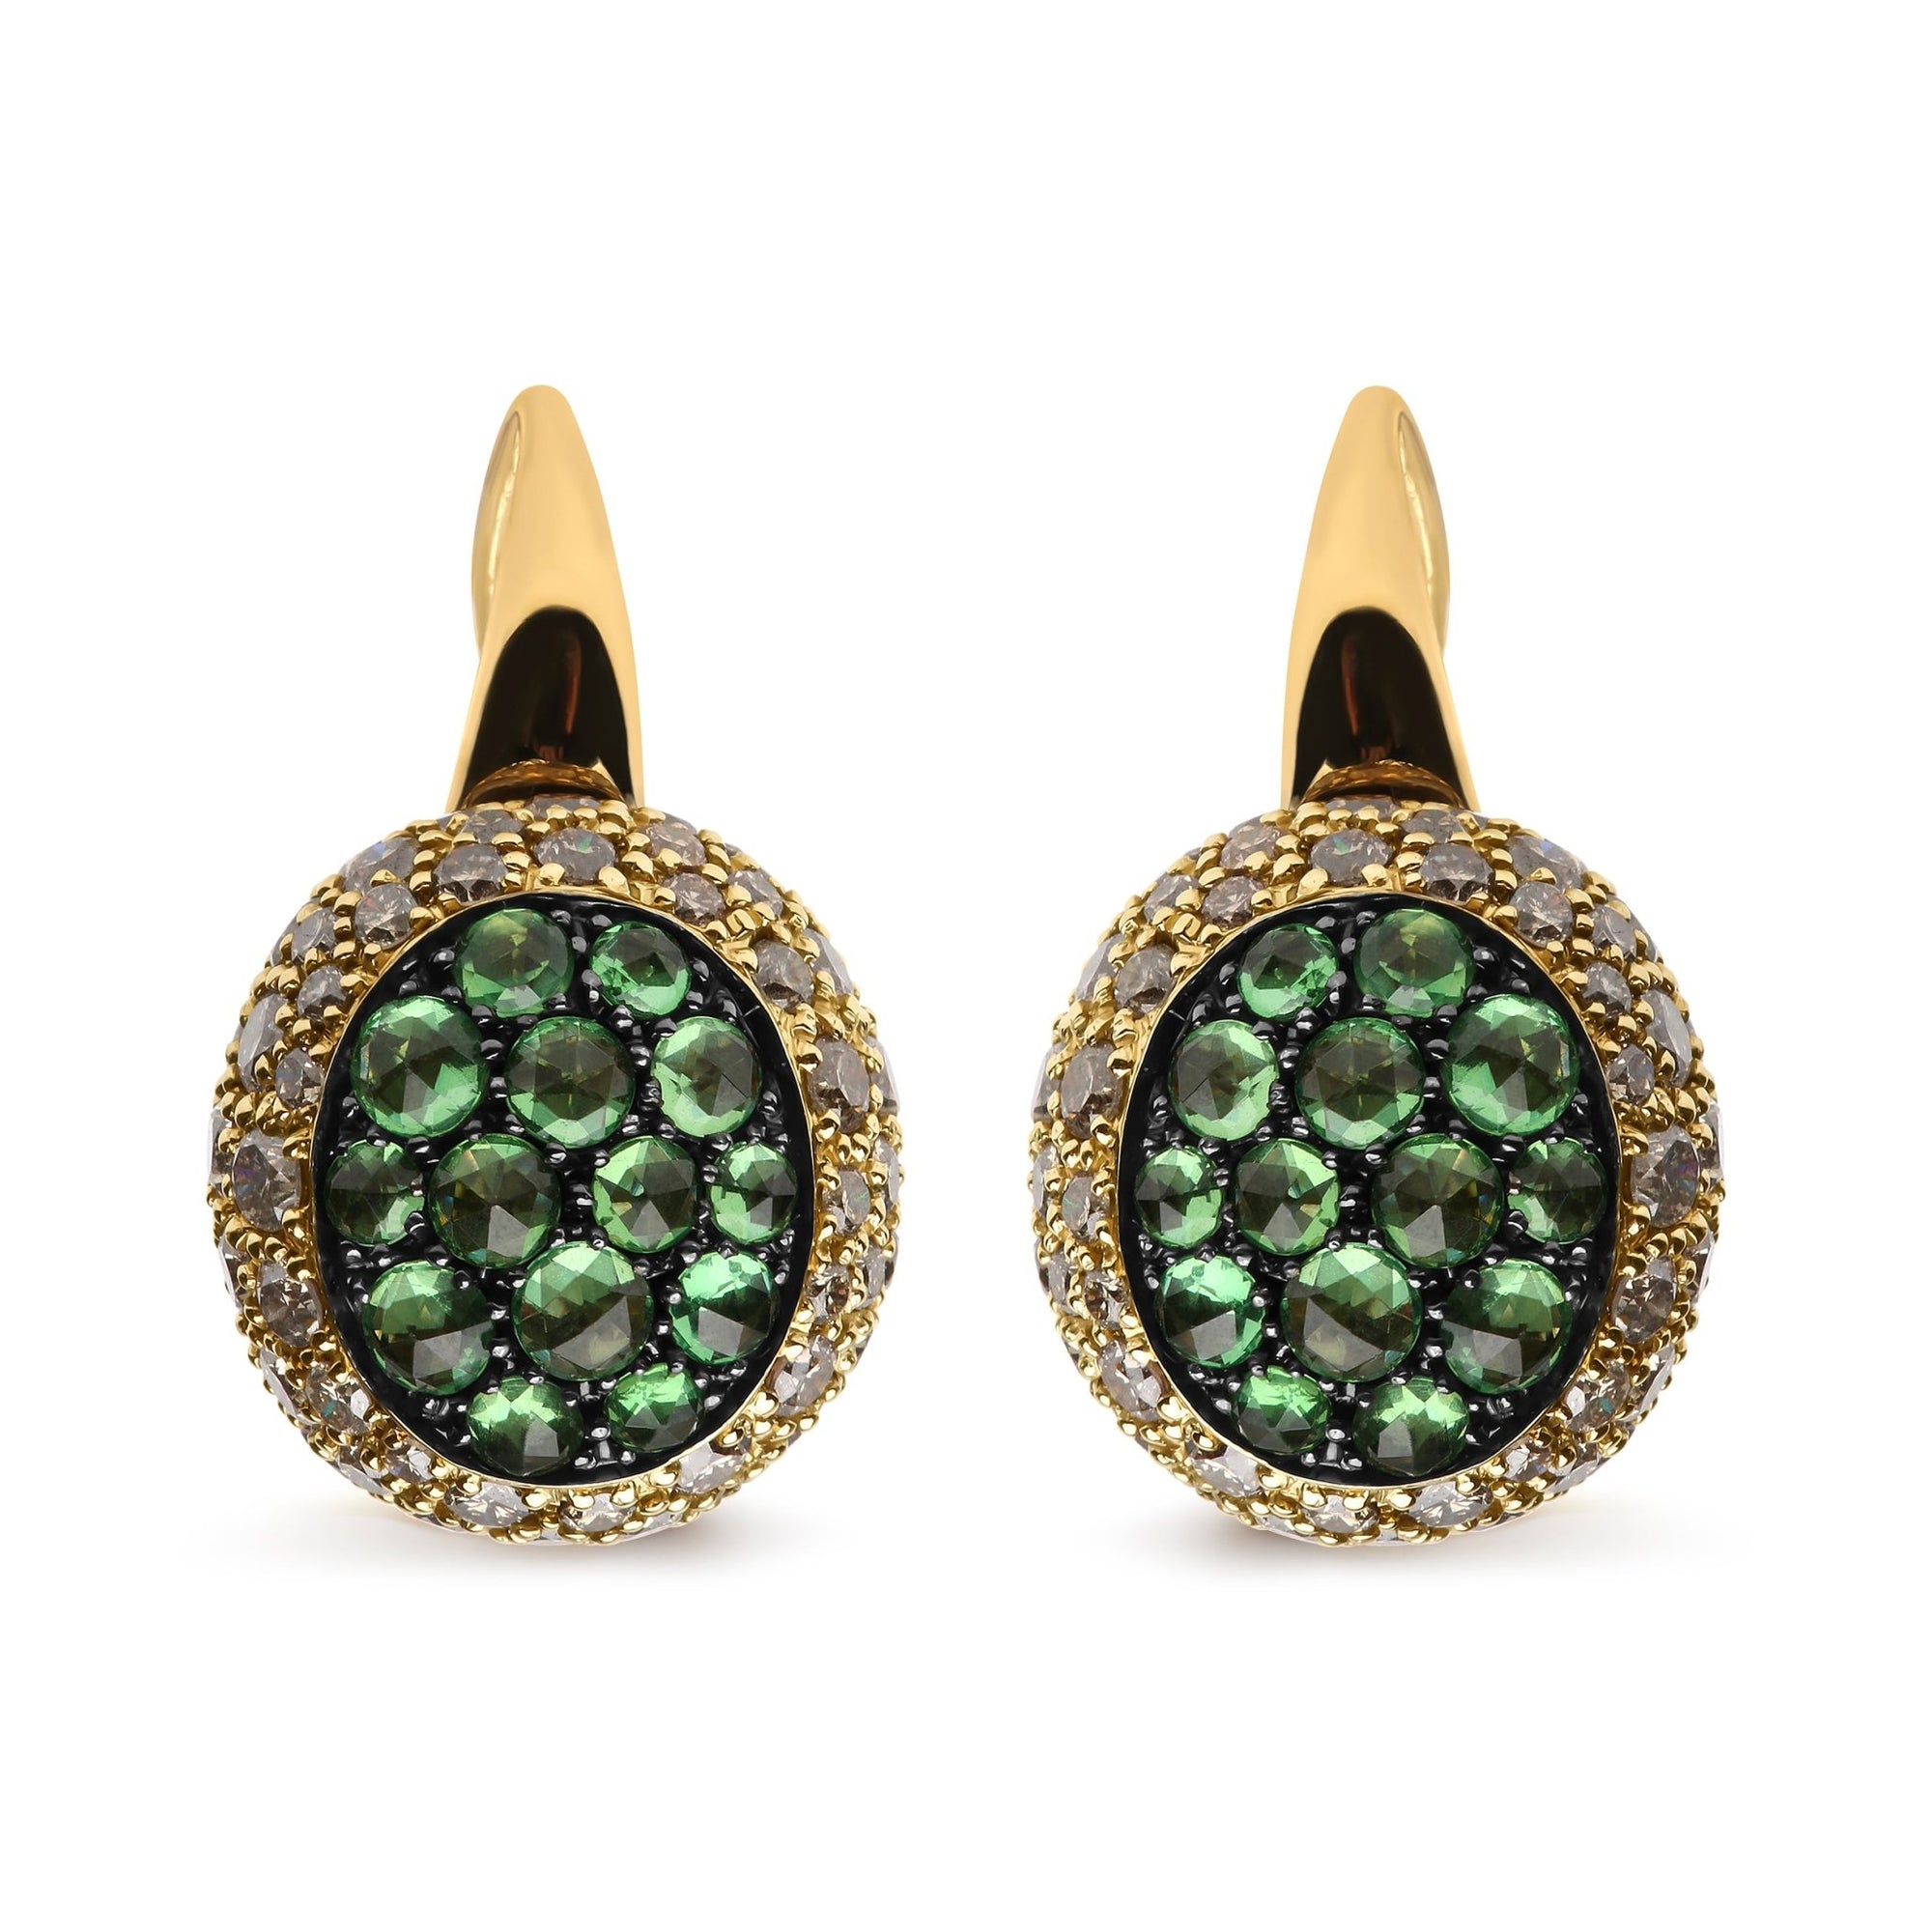 18K Yellow Gold 3 1/2 Cttw Diamond and Round Green Tsavorite Gemstone Round Domed Drop Hoop Earrings (Brown Color, SI1-SI2 Clarity) - LinkagejewelrydesignLinkagejewelrydesign